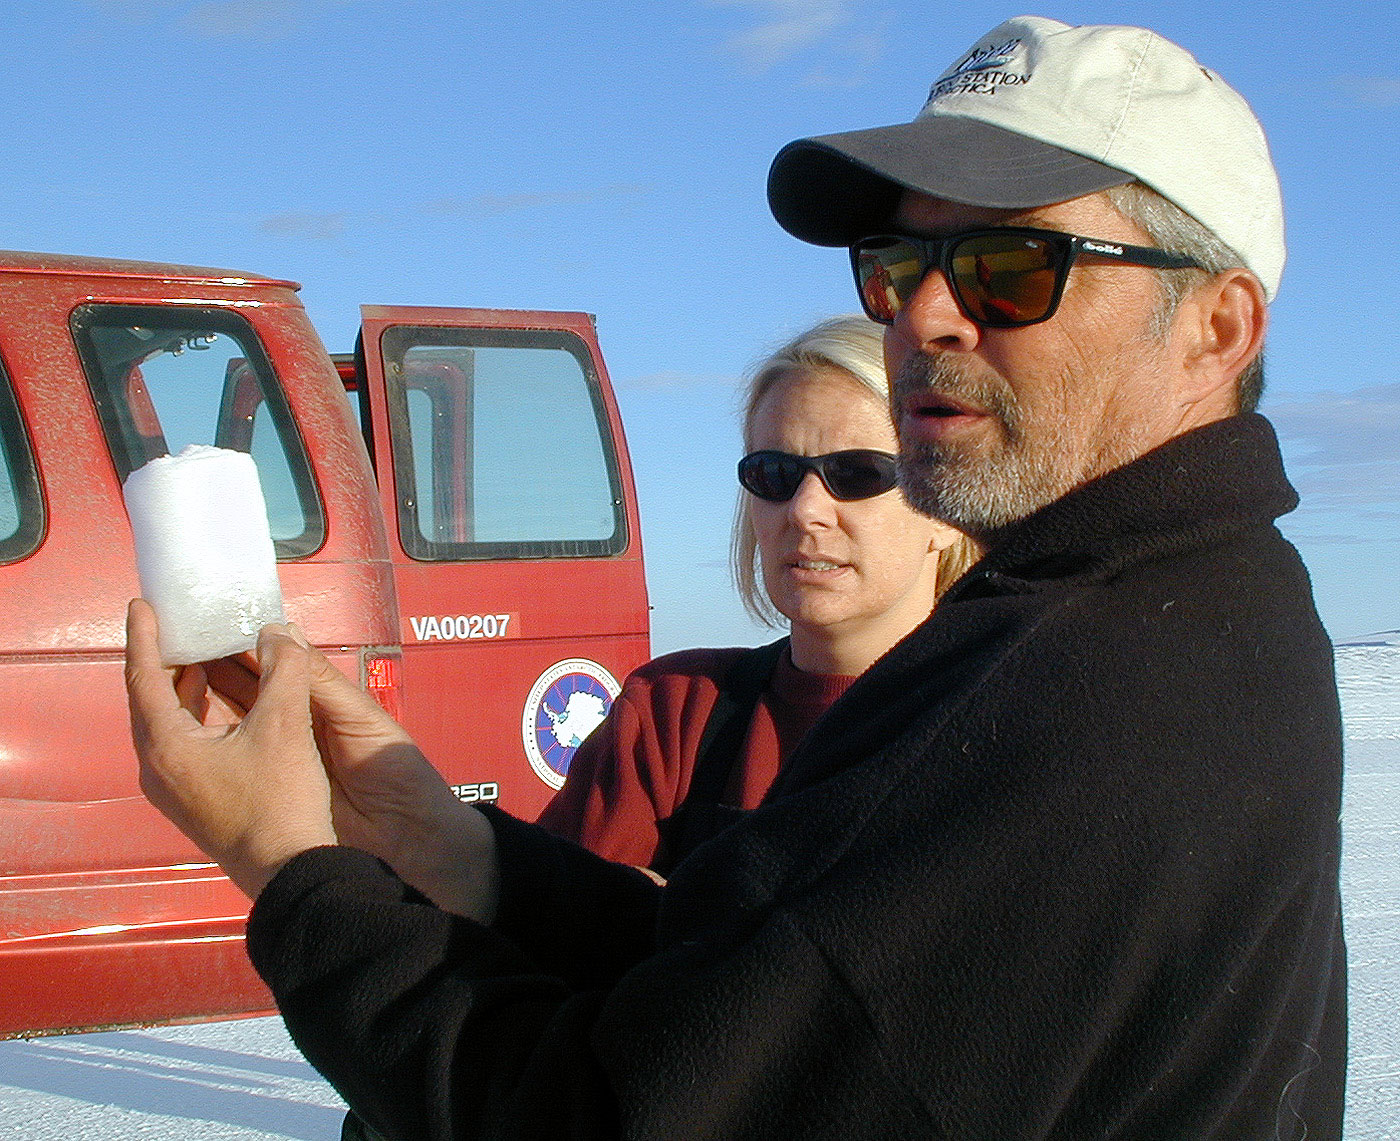 Gary Cardullo, the U.S. Antarctic Program's airfield manager